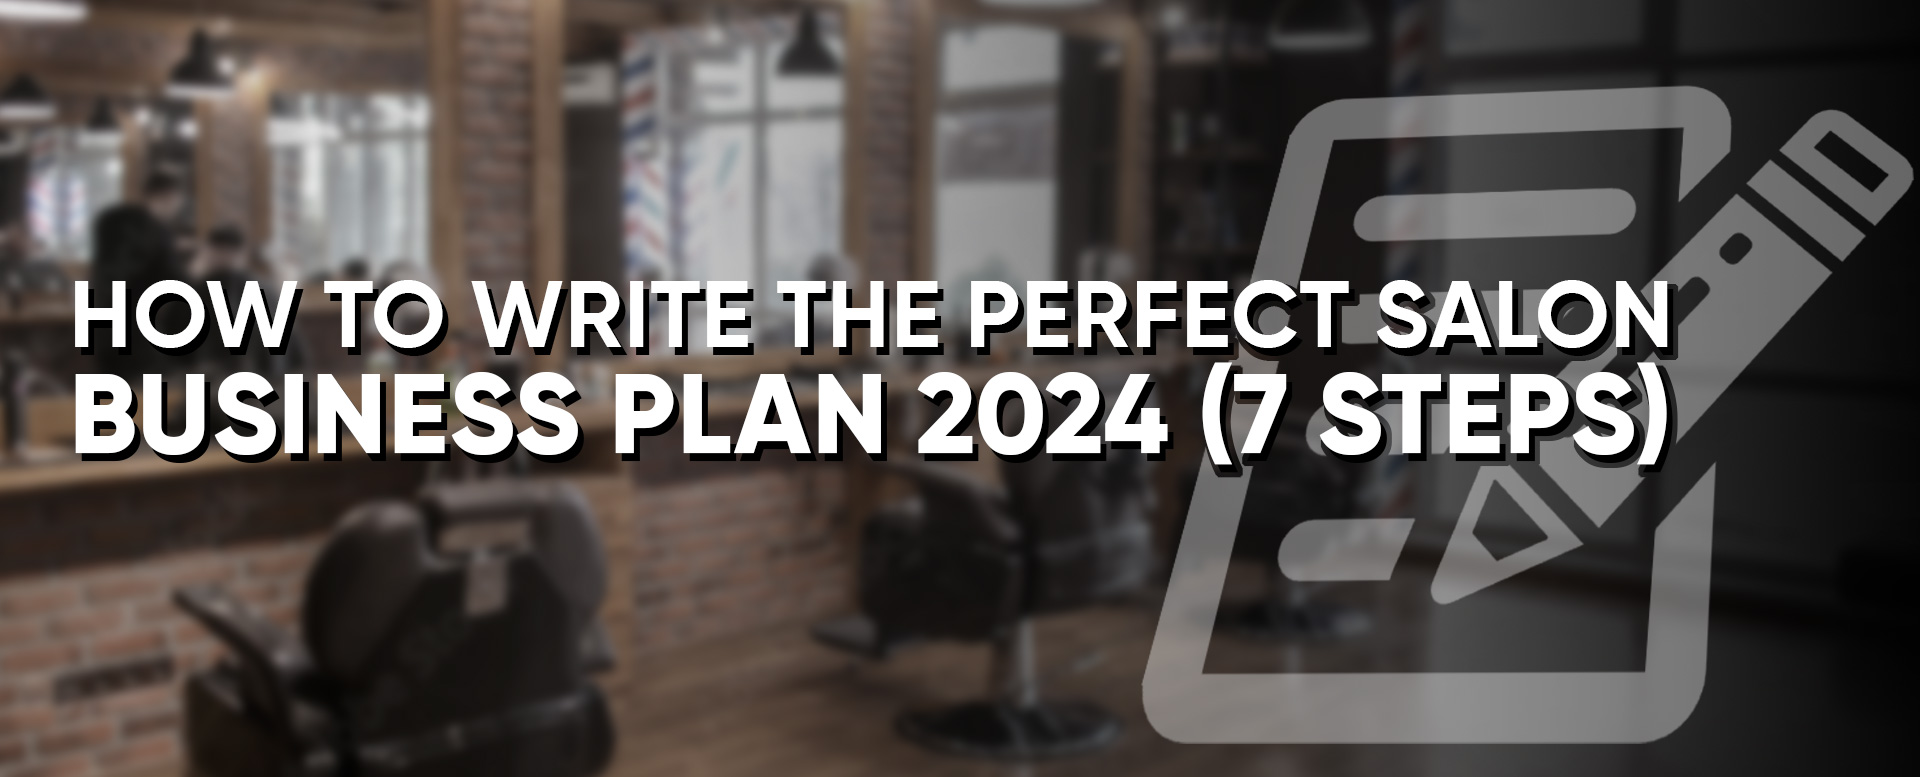 How To Write the Perfect Salon Business Plan 2024 (7 Steps)